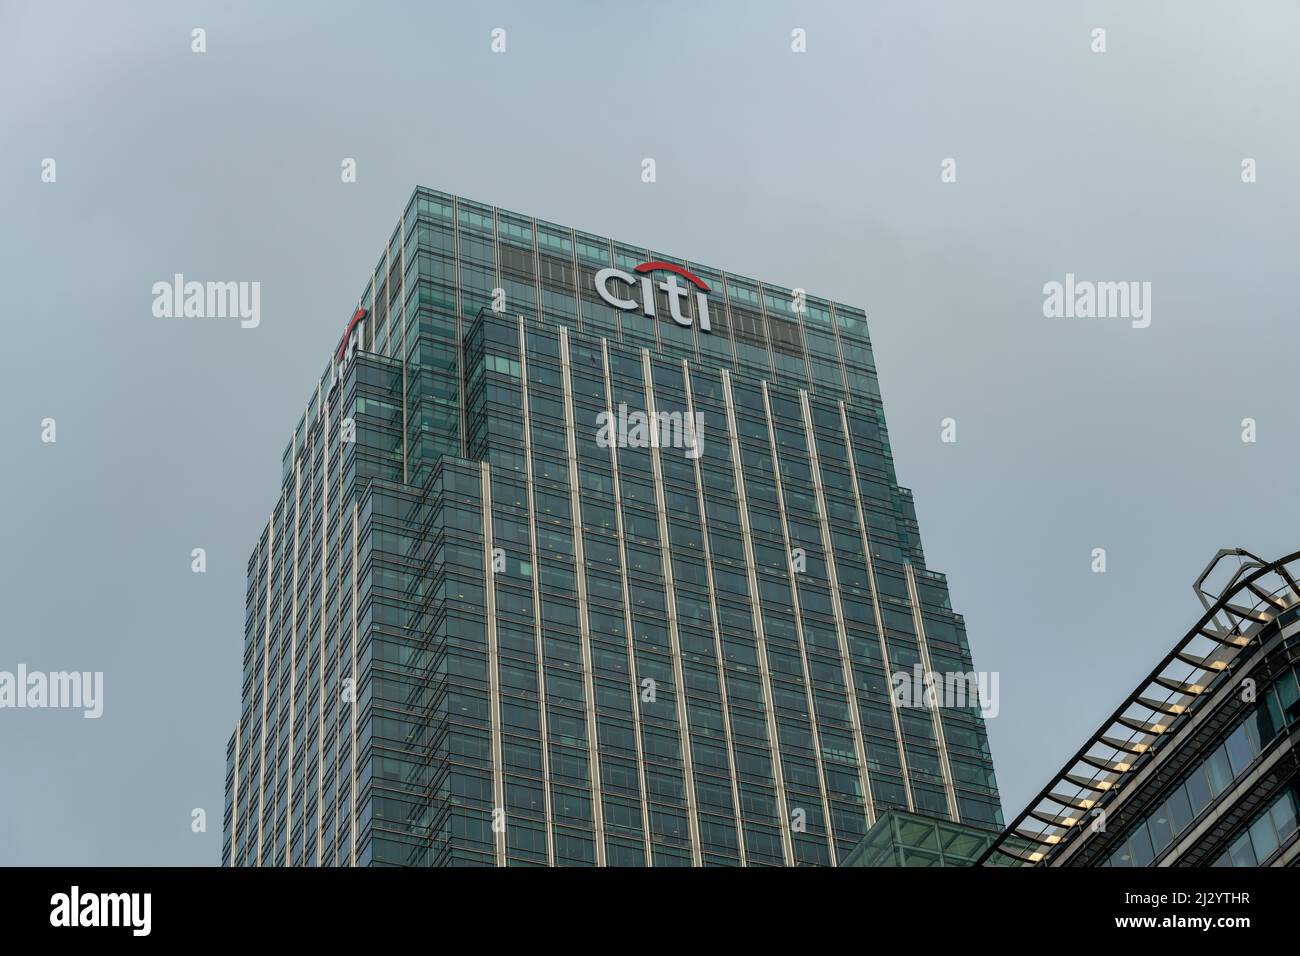 London. UK-03.30.2022. An exterior view of the Citigroup Centre building in Canada Square, Canary Wharf on a grey overcast day. Stock Photo